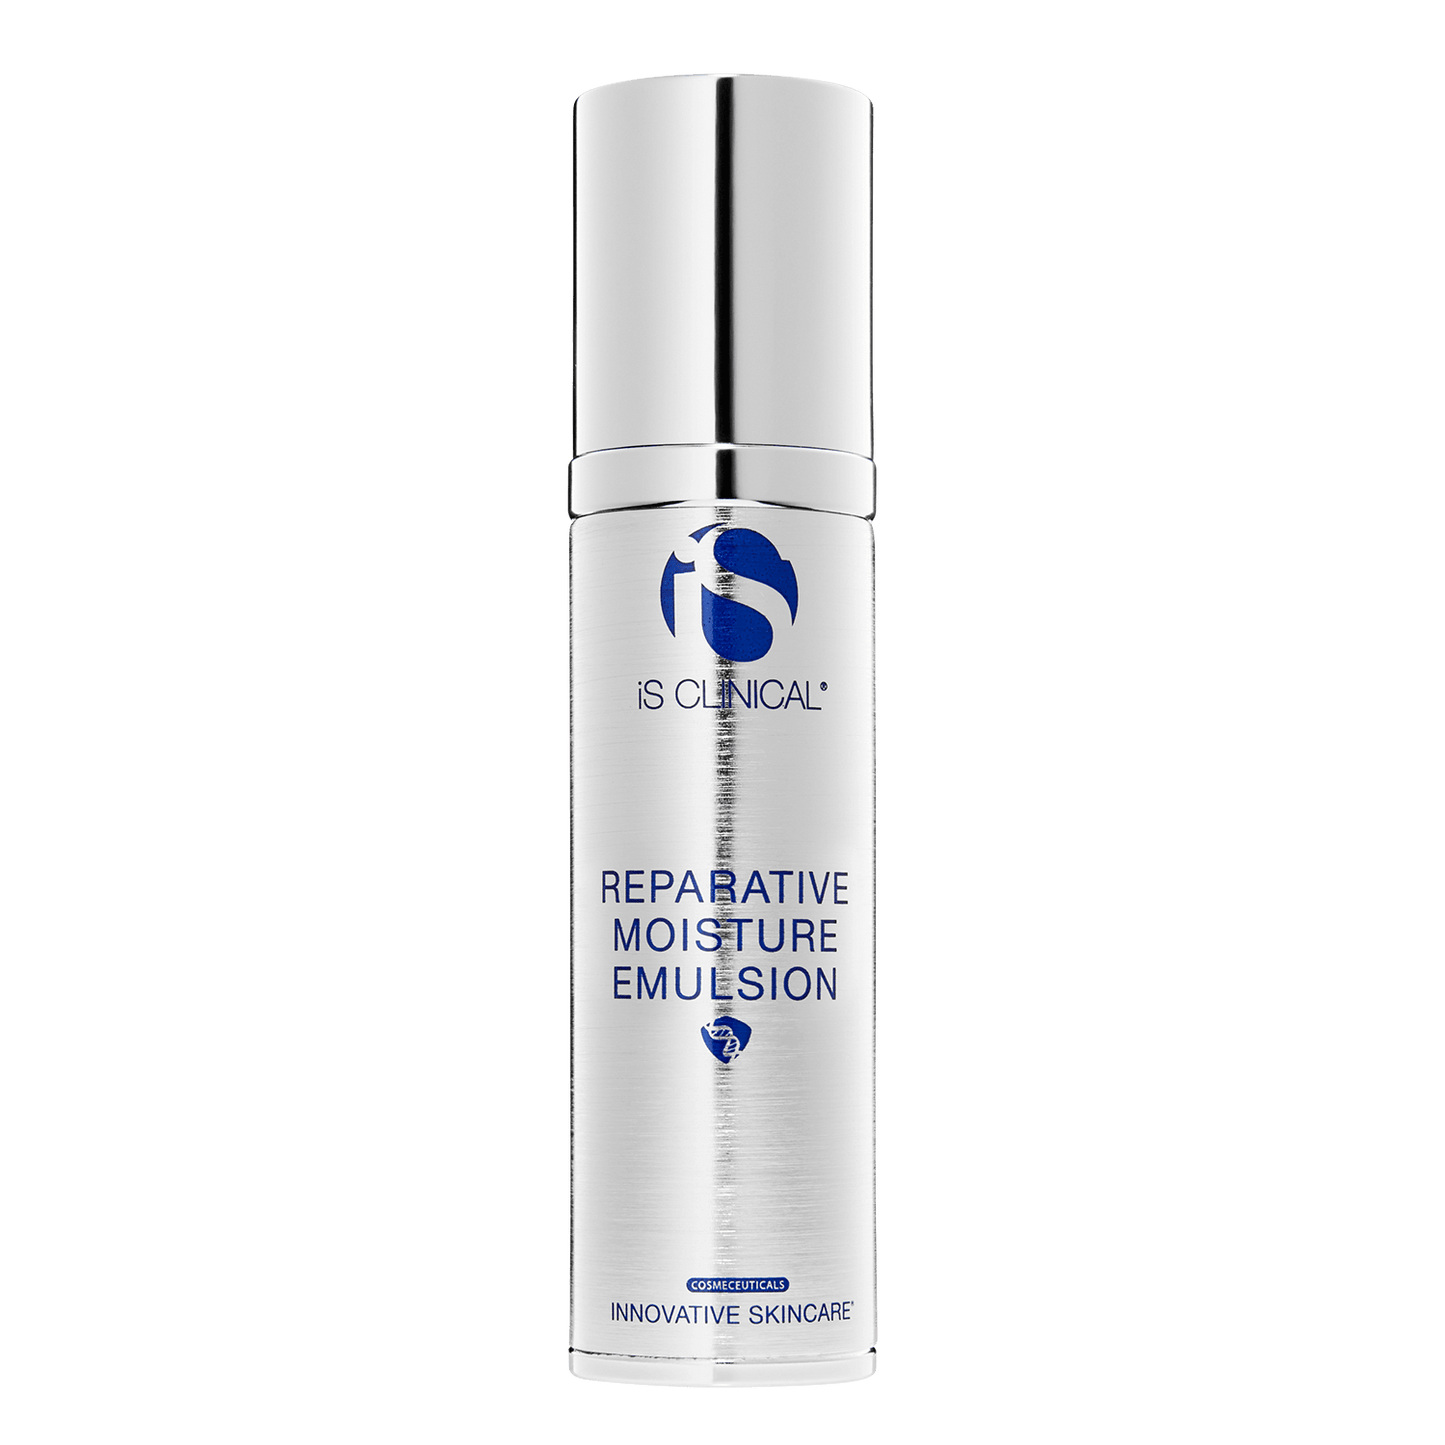 Reparative Moisture Emulsion is clinical